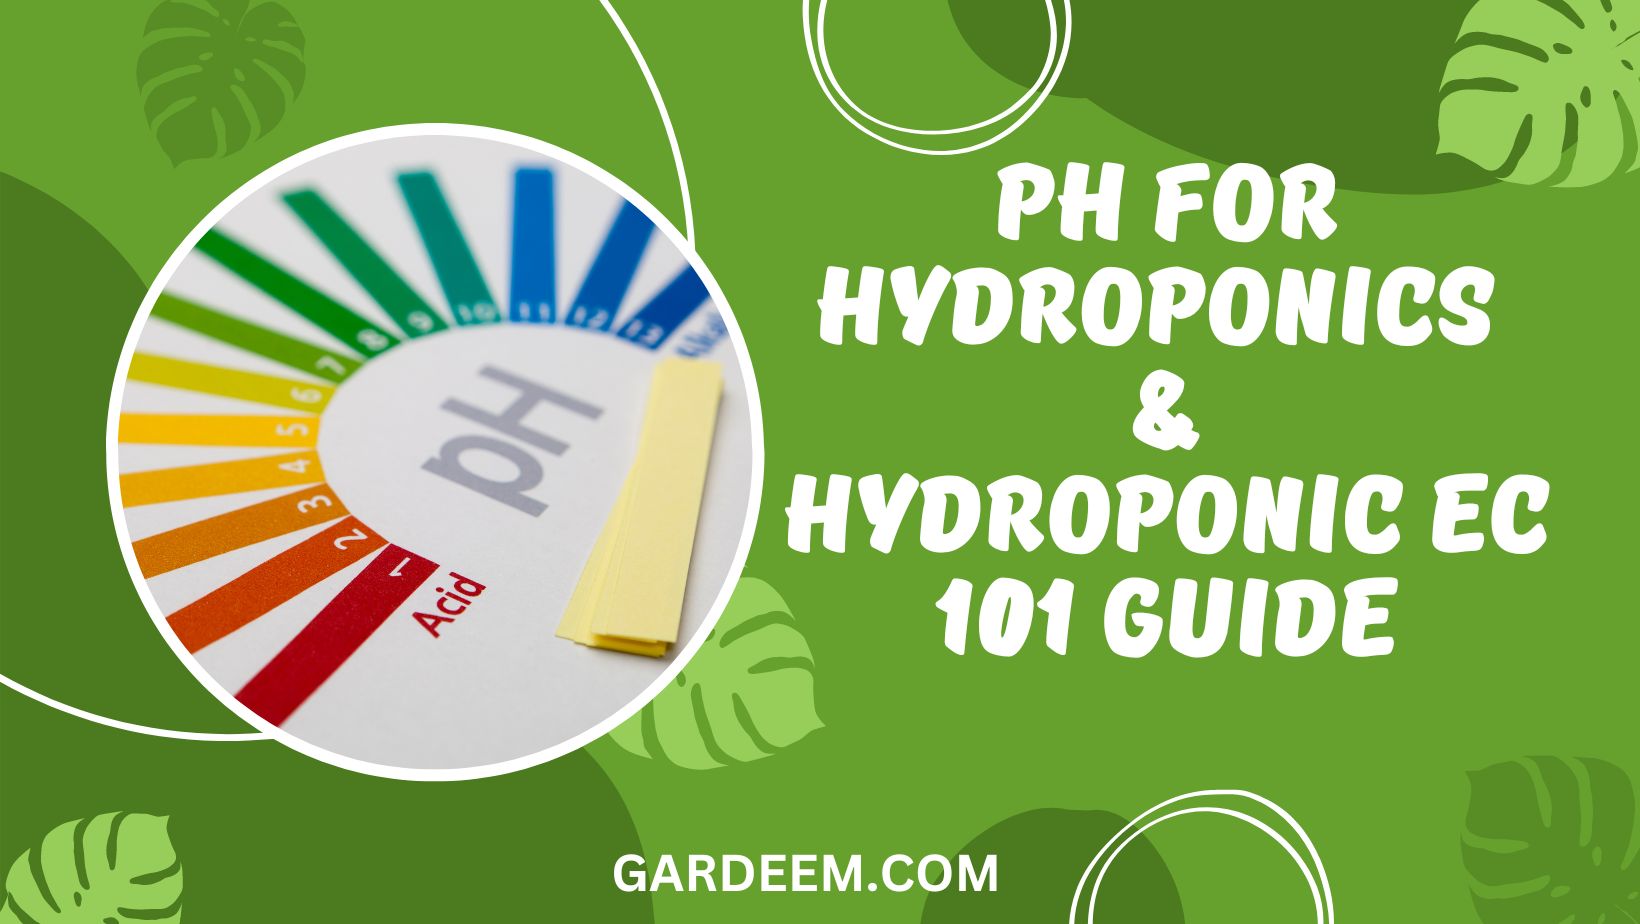 pH For Hydroponics and Hydroponic EC 101 Guide